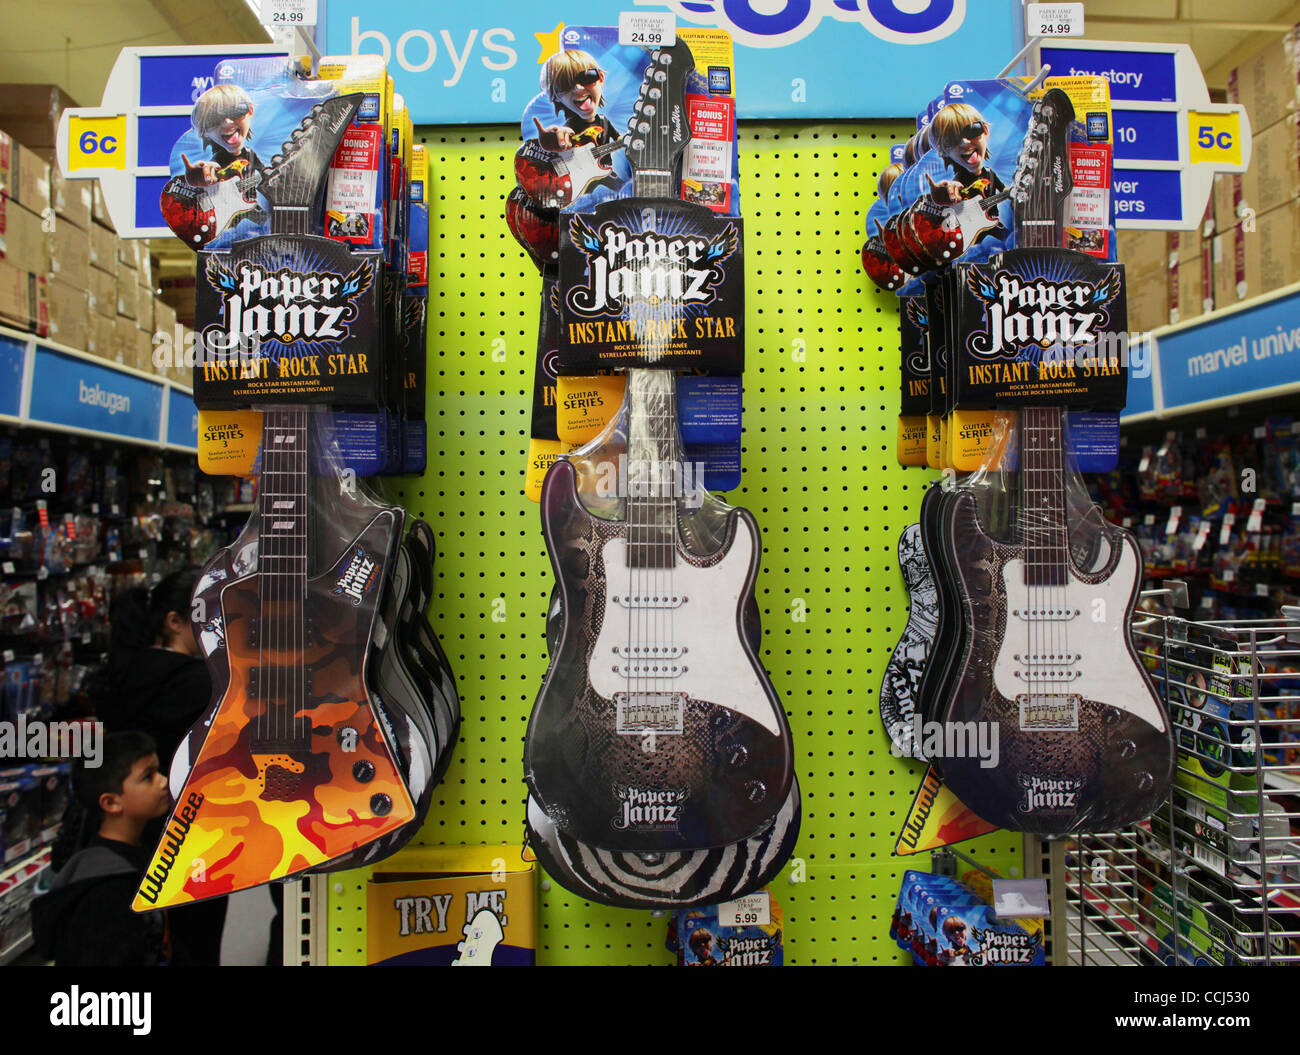 Dec 12, 2010 - Laguna Niguel, California, U.S. - Paper Jams electric guitar  for sale in Toys R Us. Paper Jamz is a toy electronic guitar that provides  a surprisingly good approximation